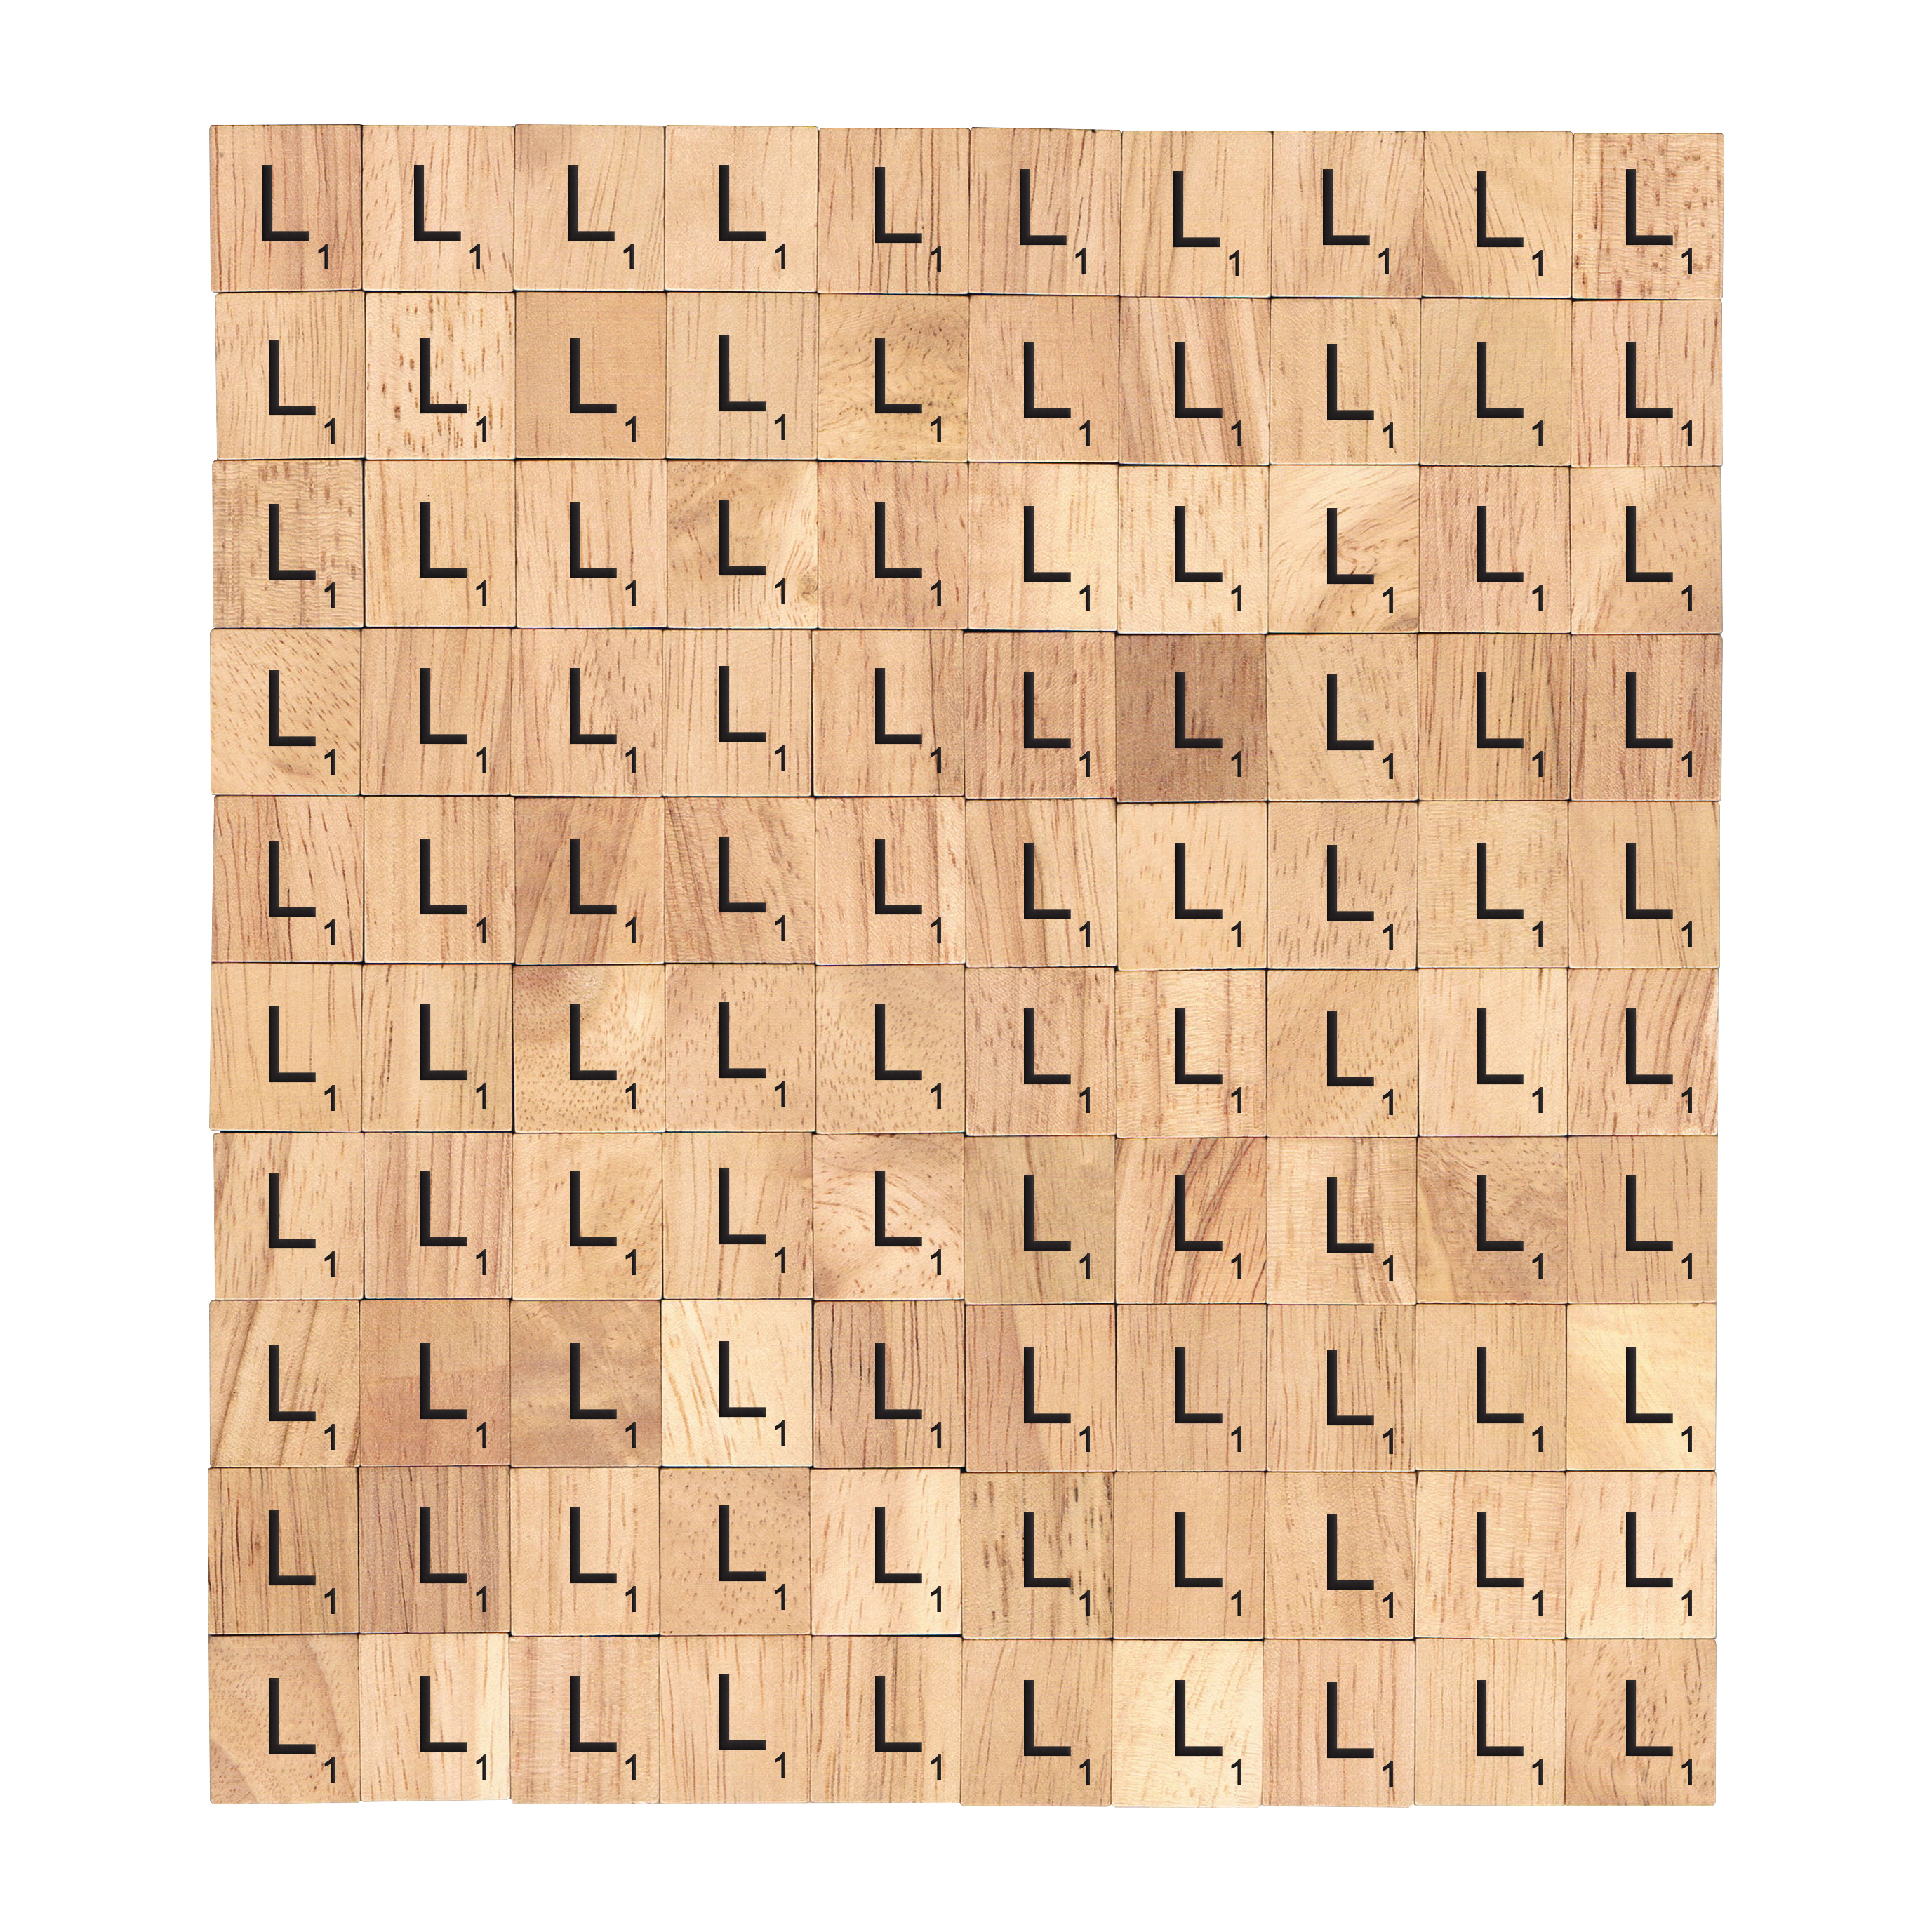 10 Scrabble Letter L Replacement Tiles or for Crafts